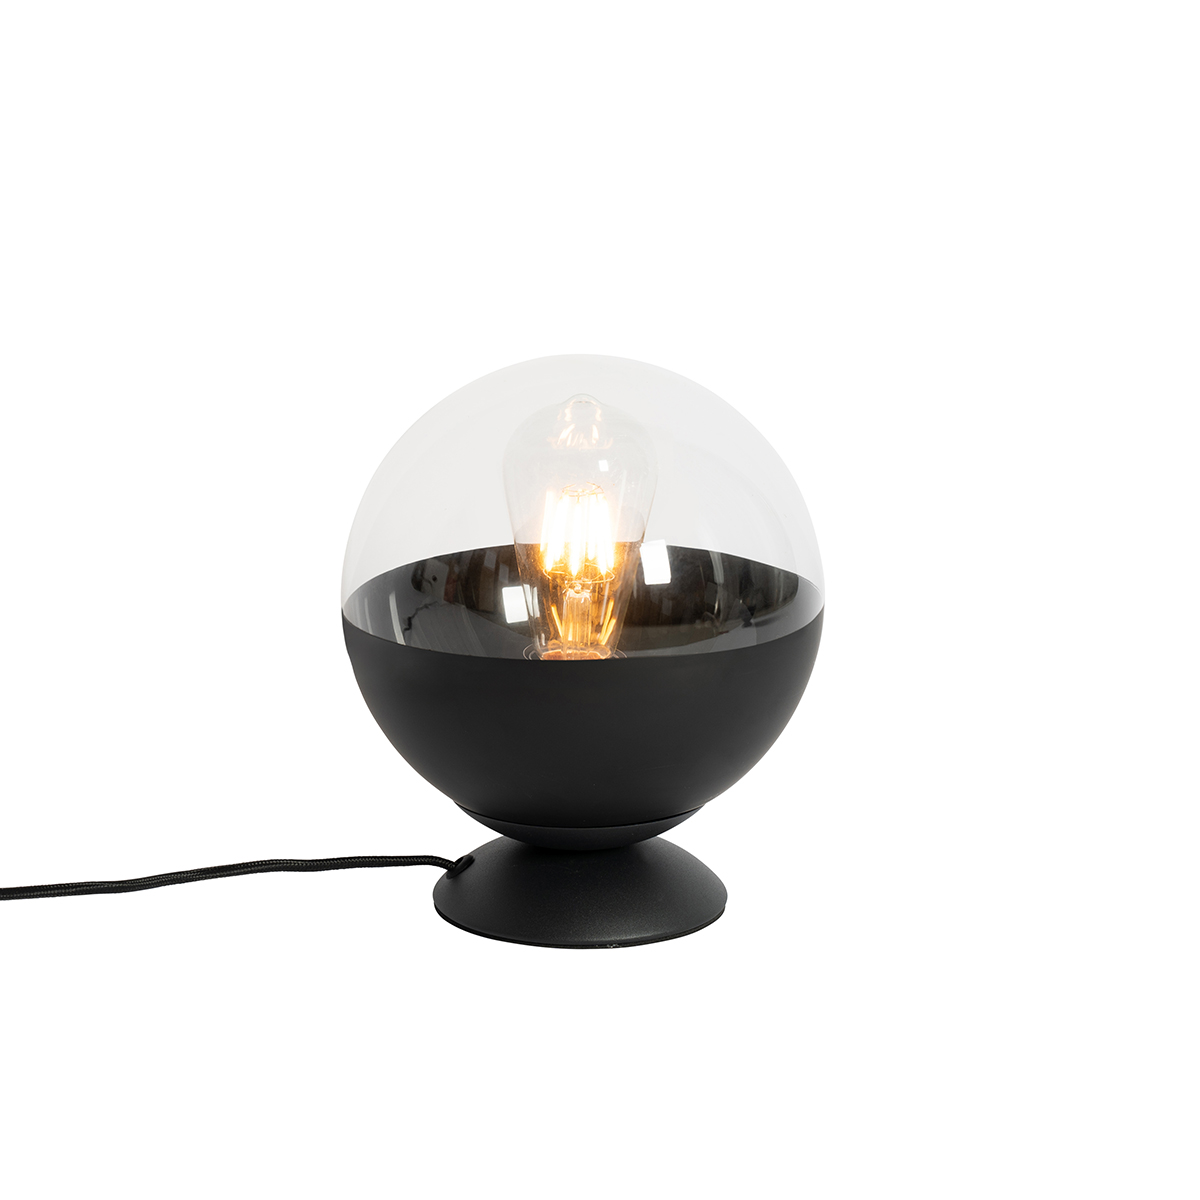 Retro table lamp black with clear glass - Eclipse